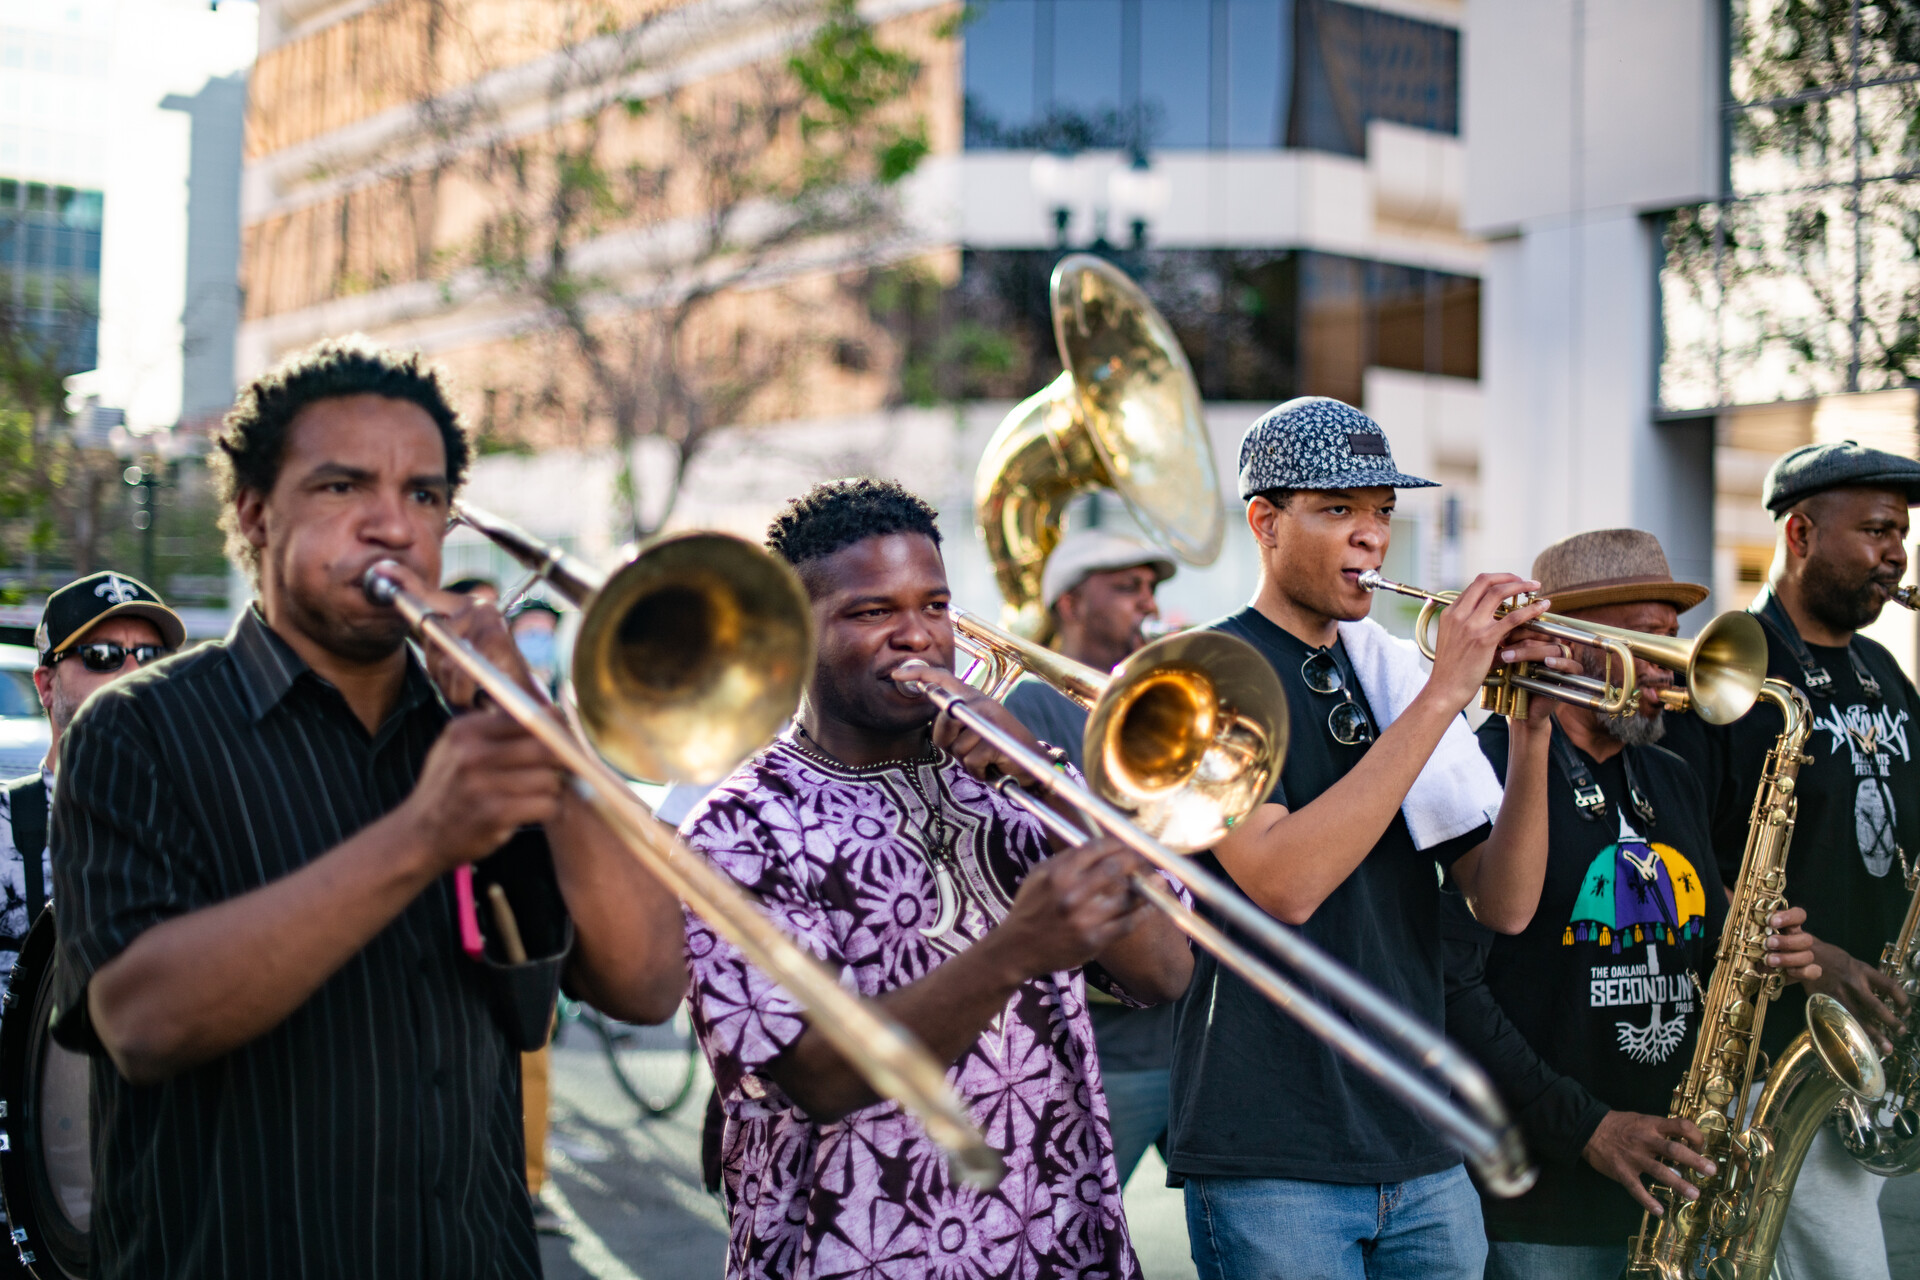 Line of Black men playing trombones, trumpet and tuba walk down a street on a sunlit evening